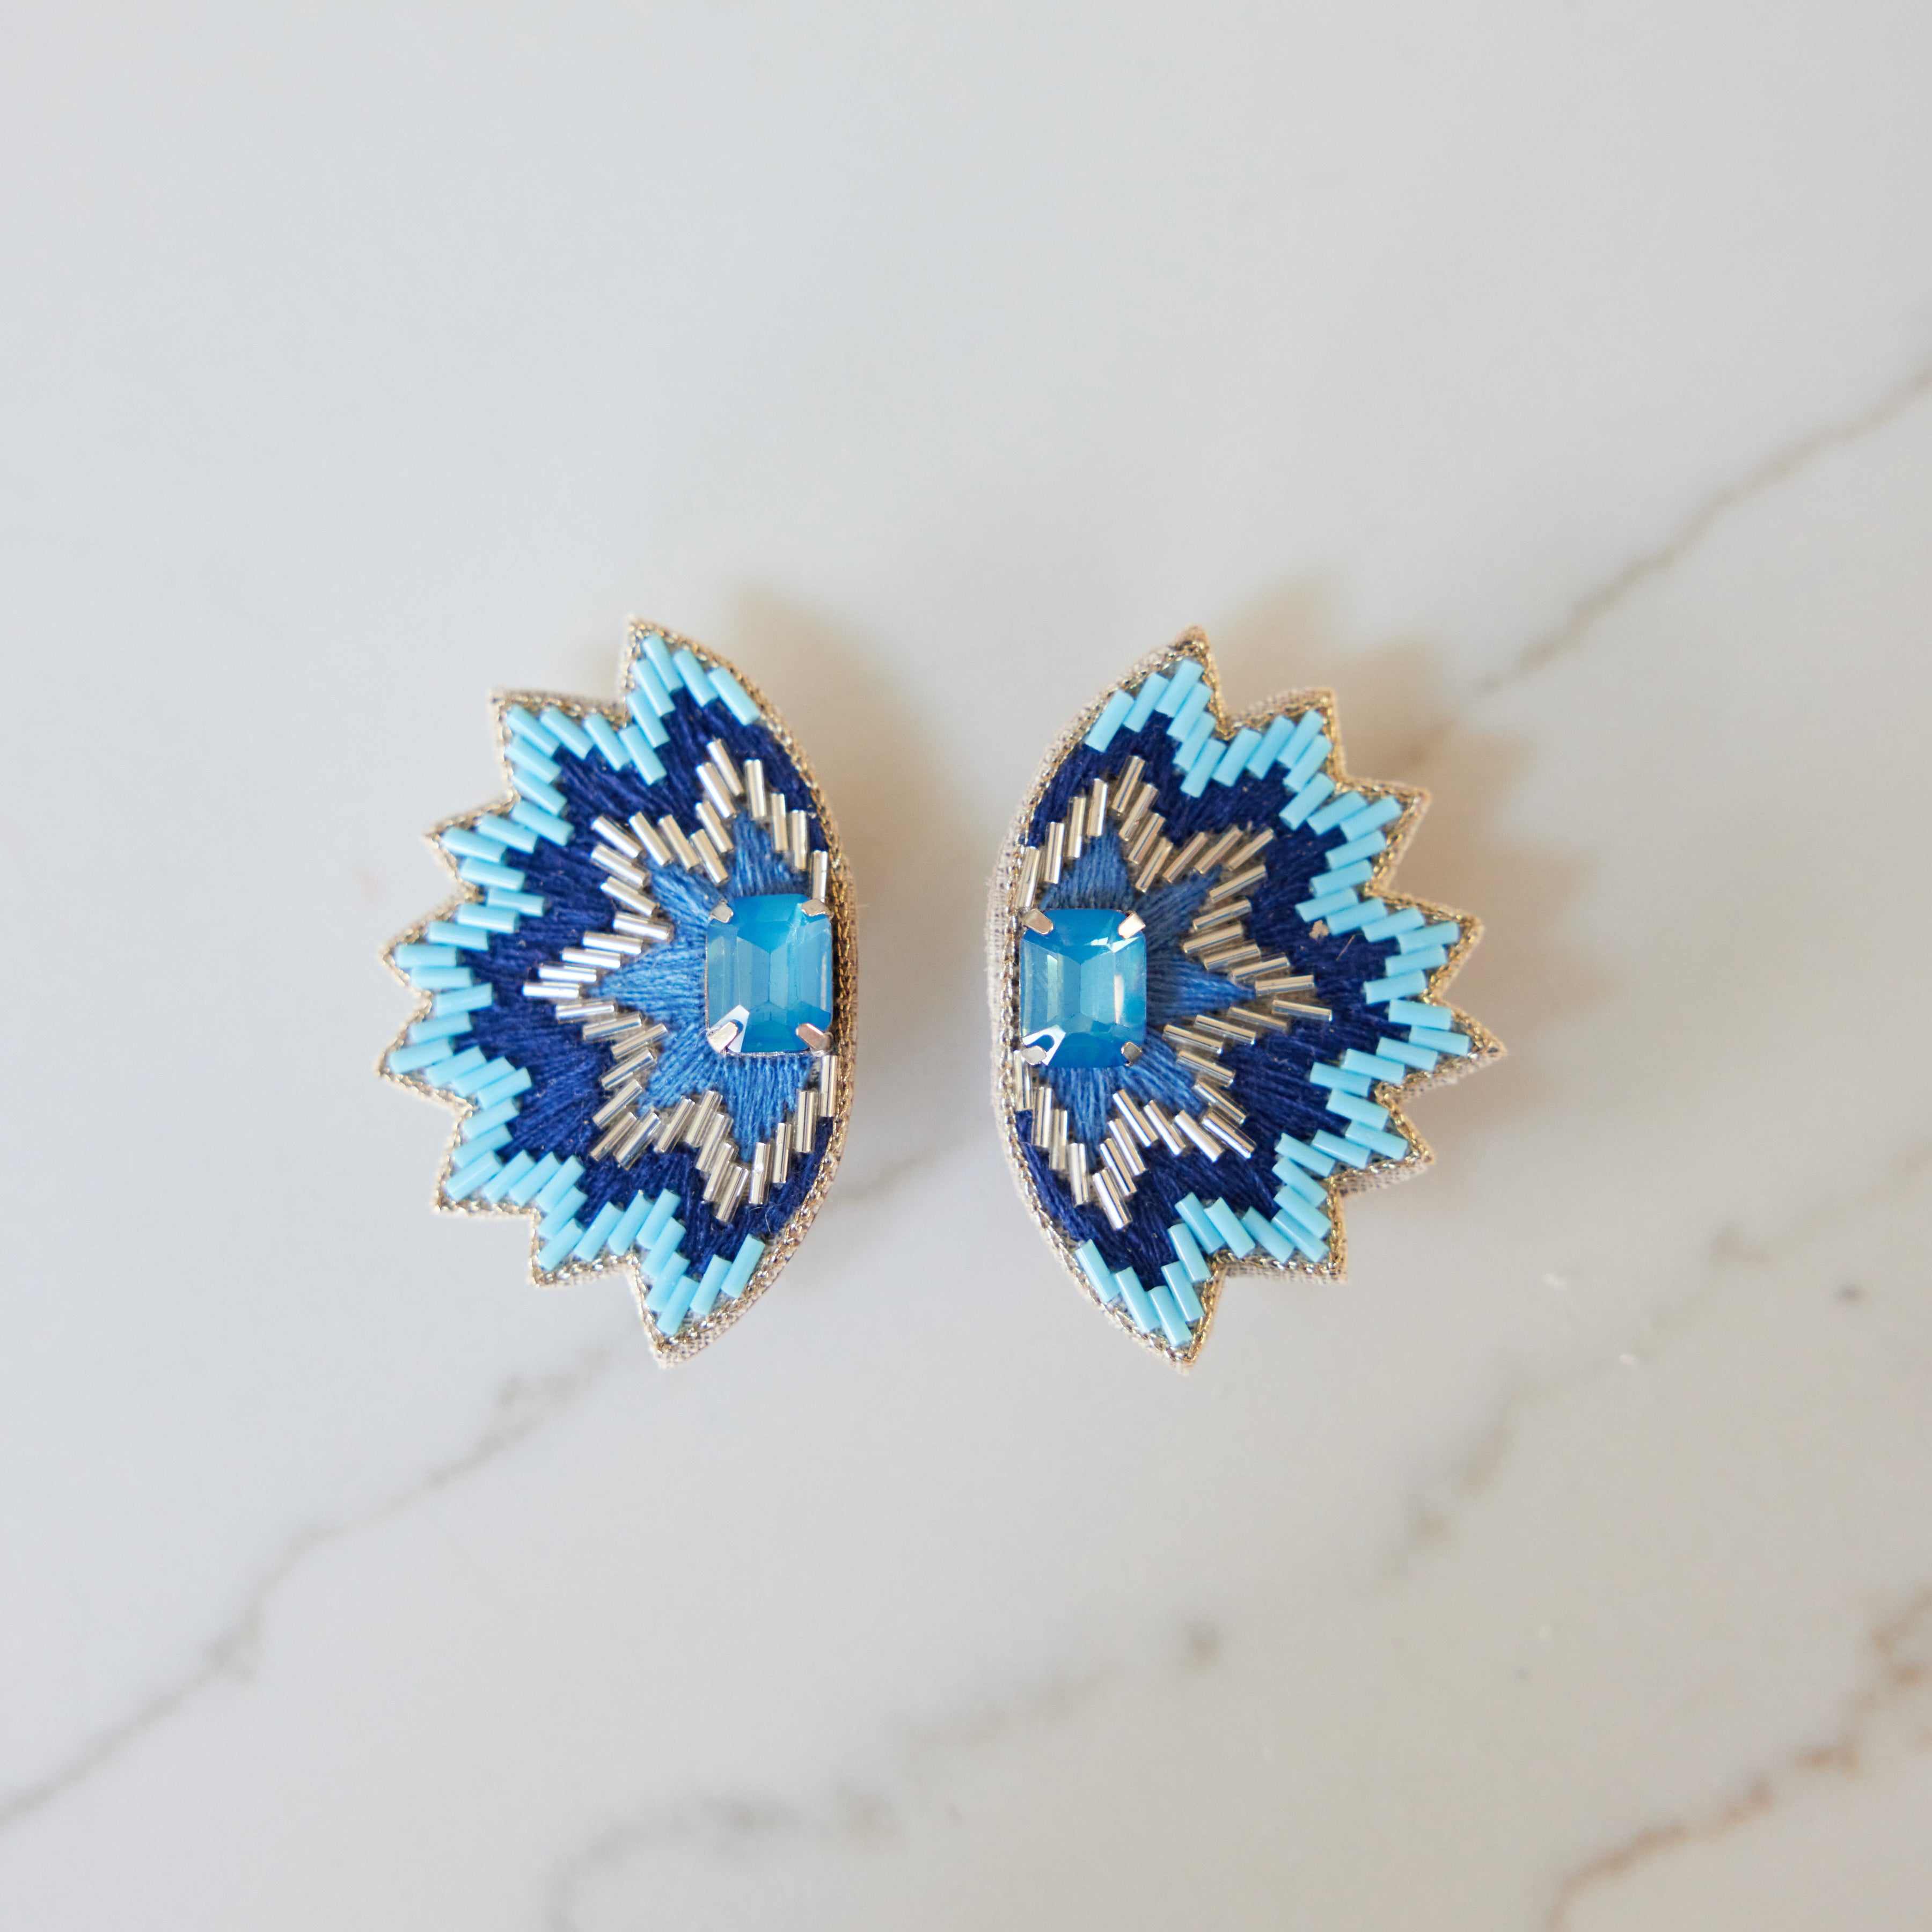 Soho Studs in Shades of Blue